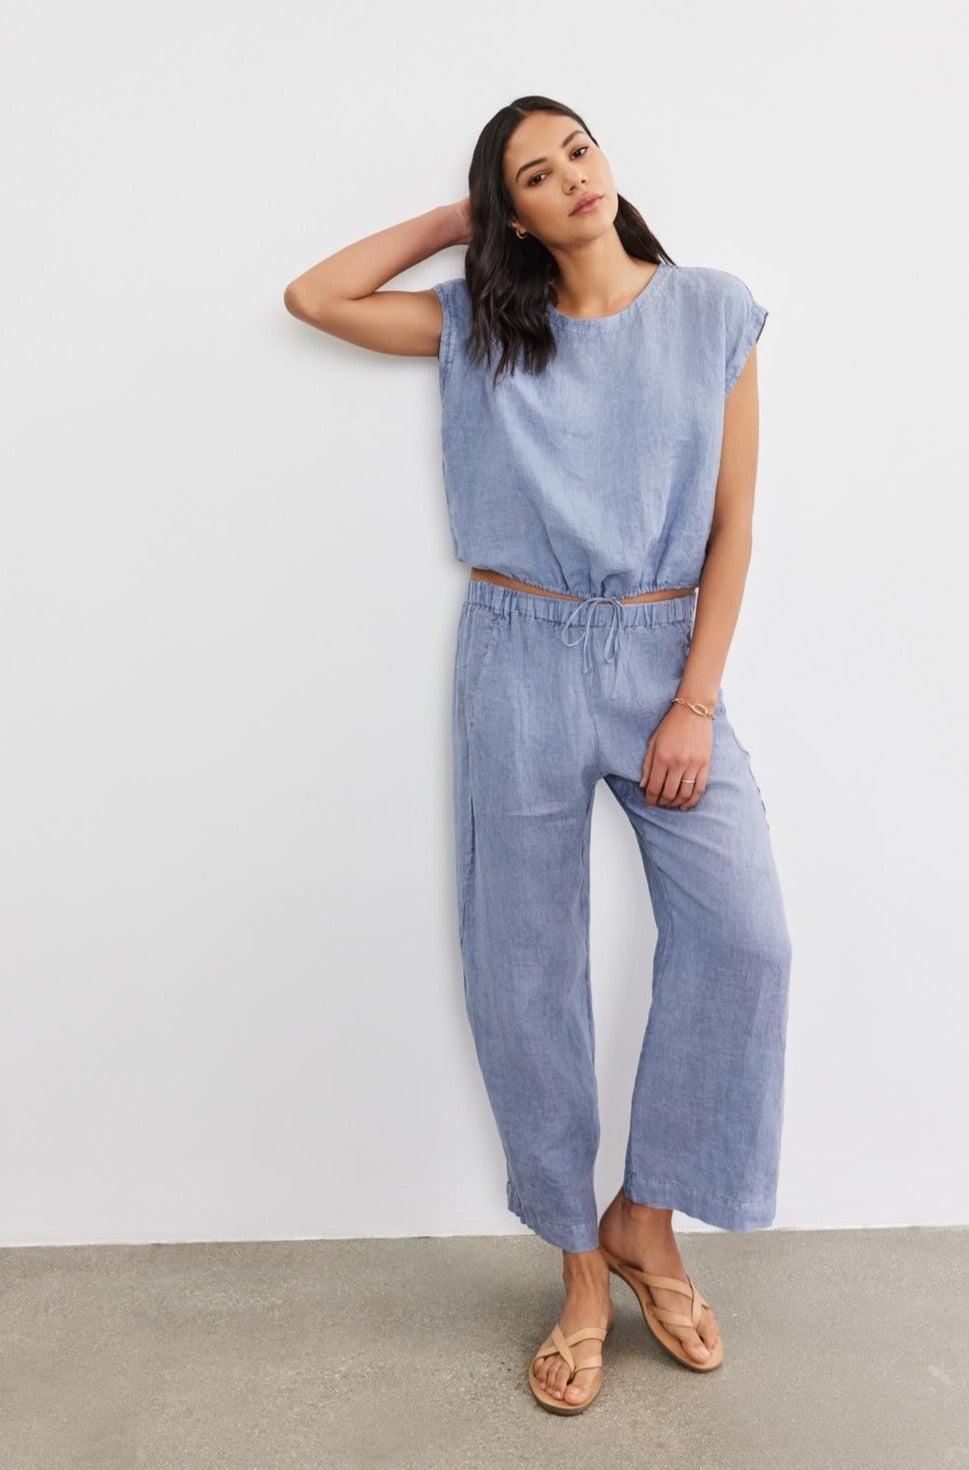 Woman in blue Velvet by Graham & Spencer LOLA LINEN PANT trousers leaning against a white wall, looking at the camera.-36910133149889